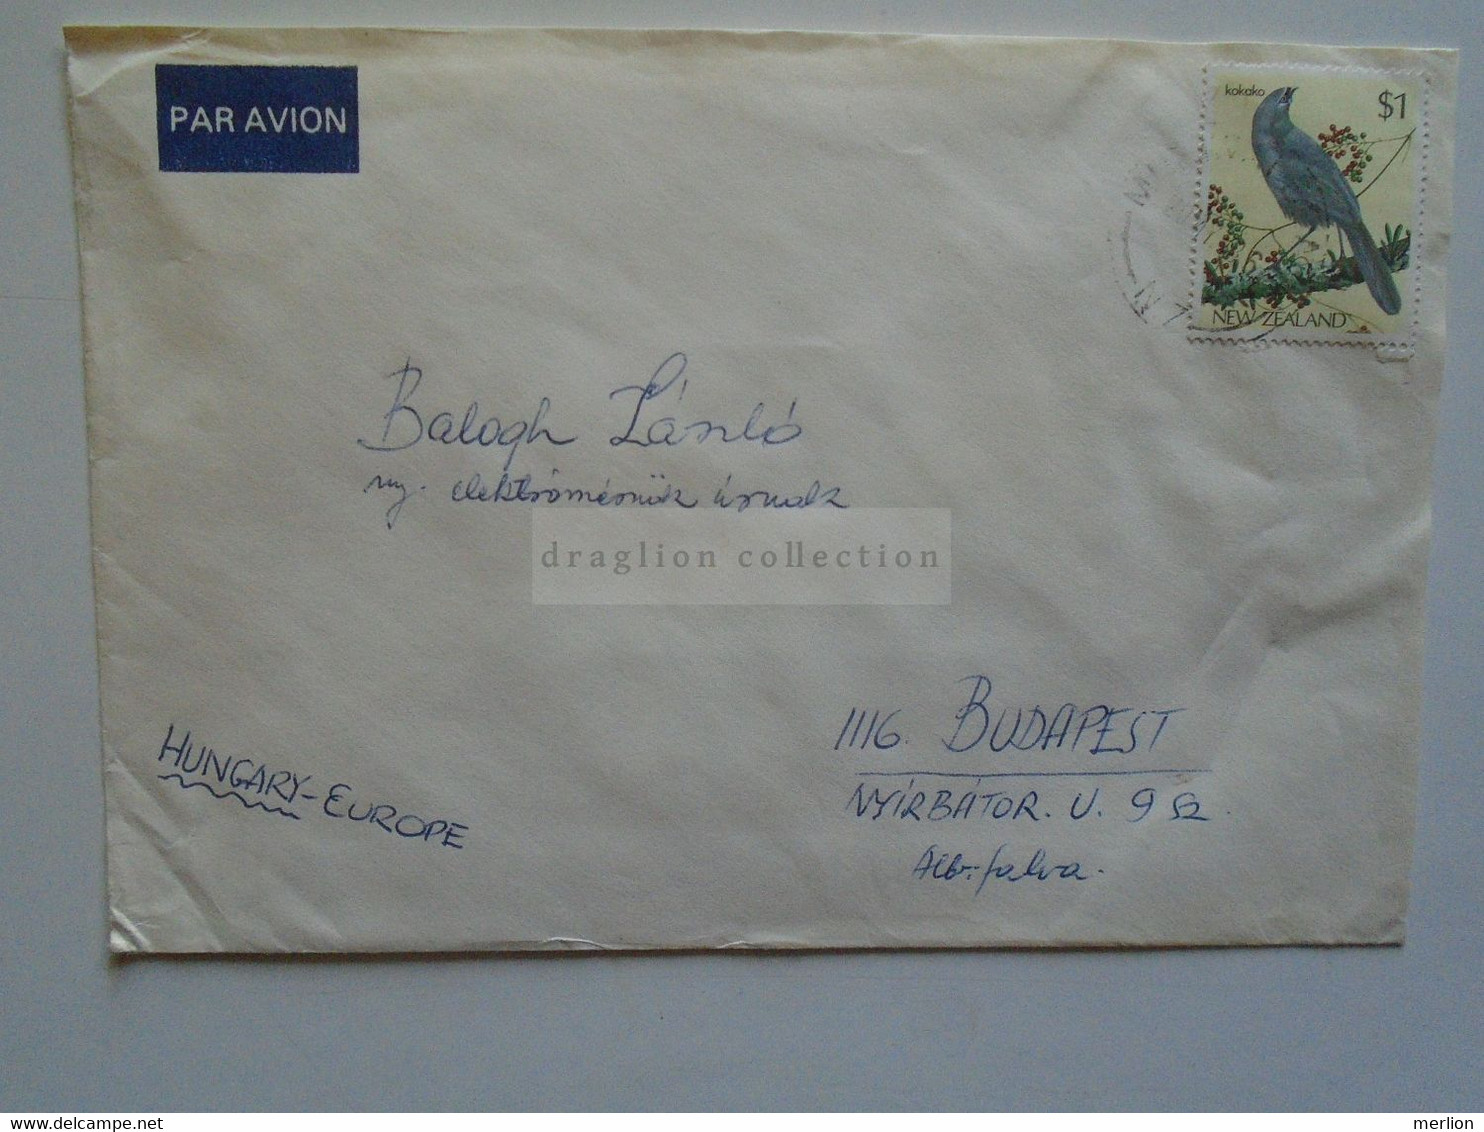 E0245  New Zealand  Airmail  Cover  - Cancel  1988  Muriwai Beach  Stamp Bird Kokao   Sent To Hungary - Lettres & Documents